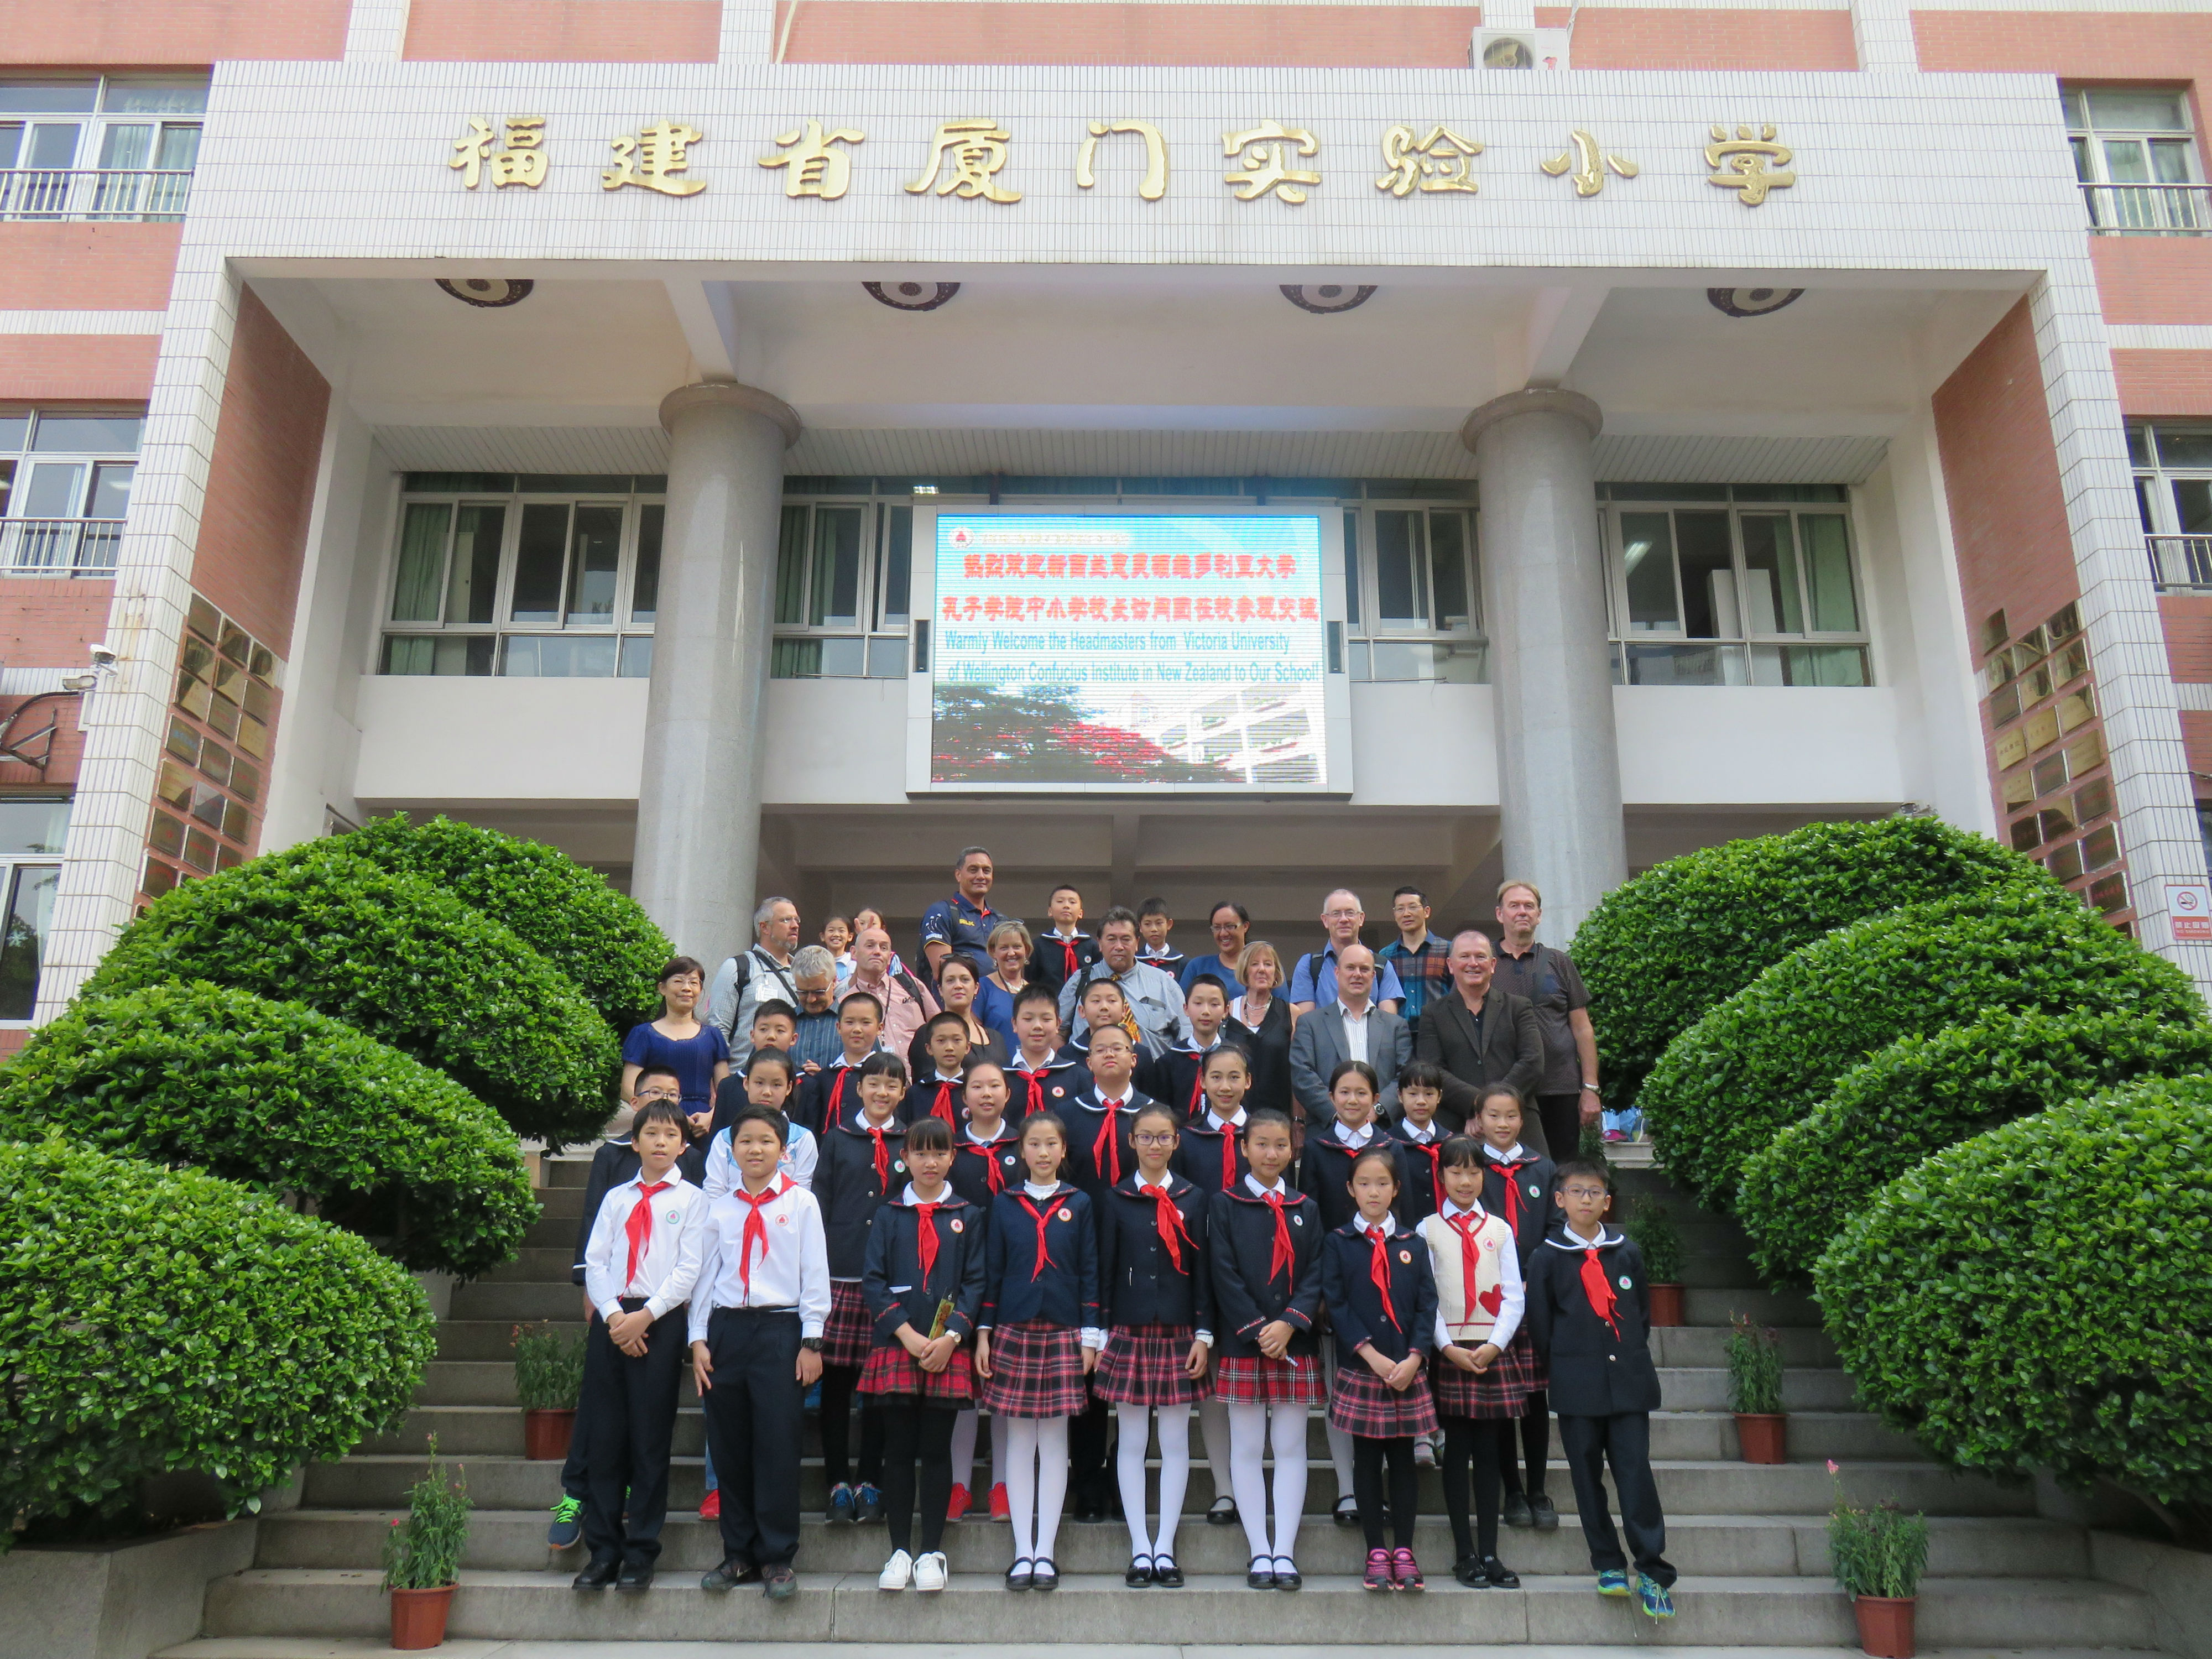 meeting with the principal, teachers and students